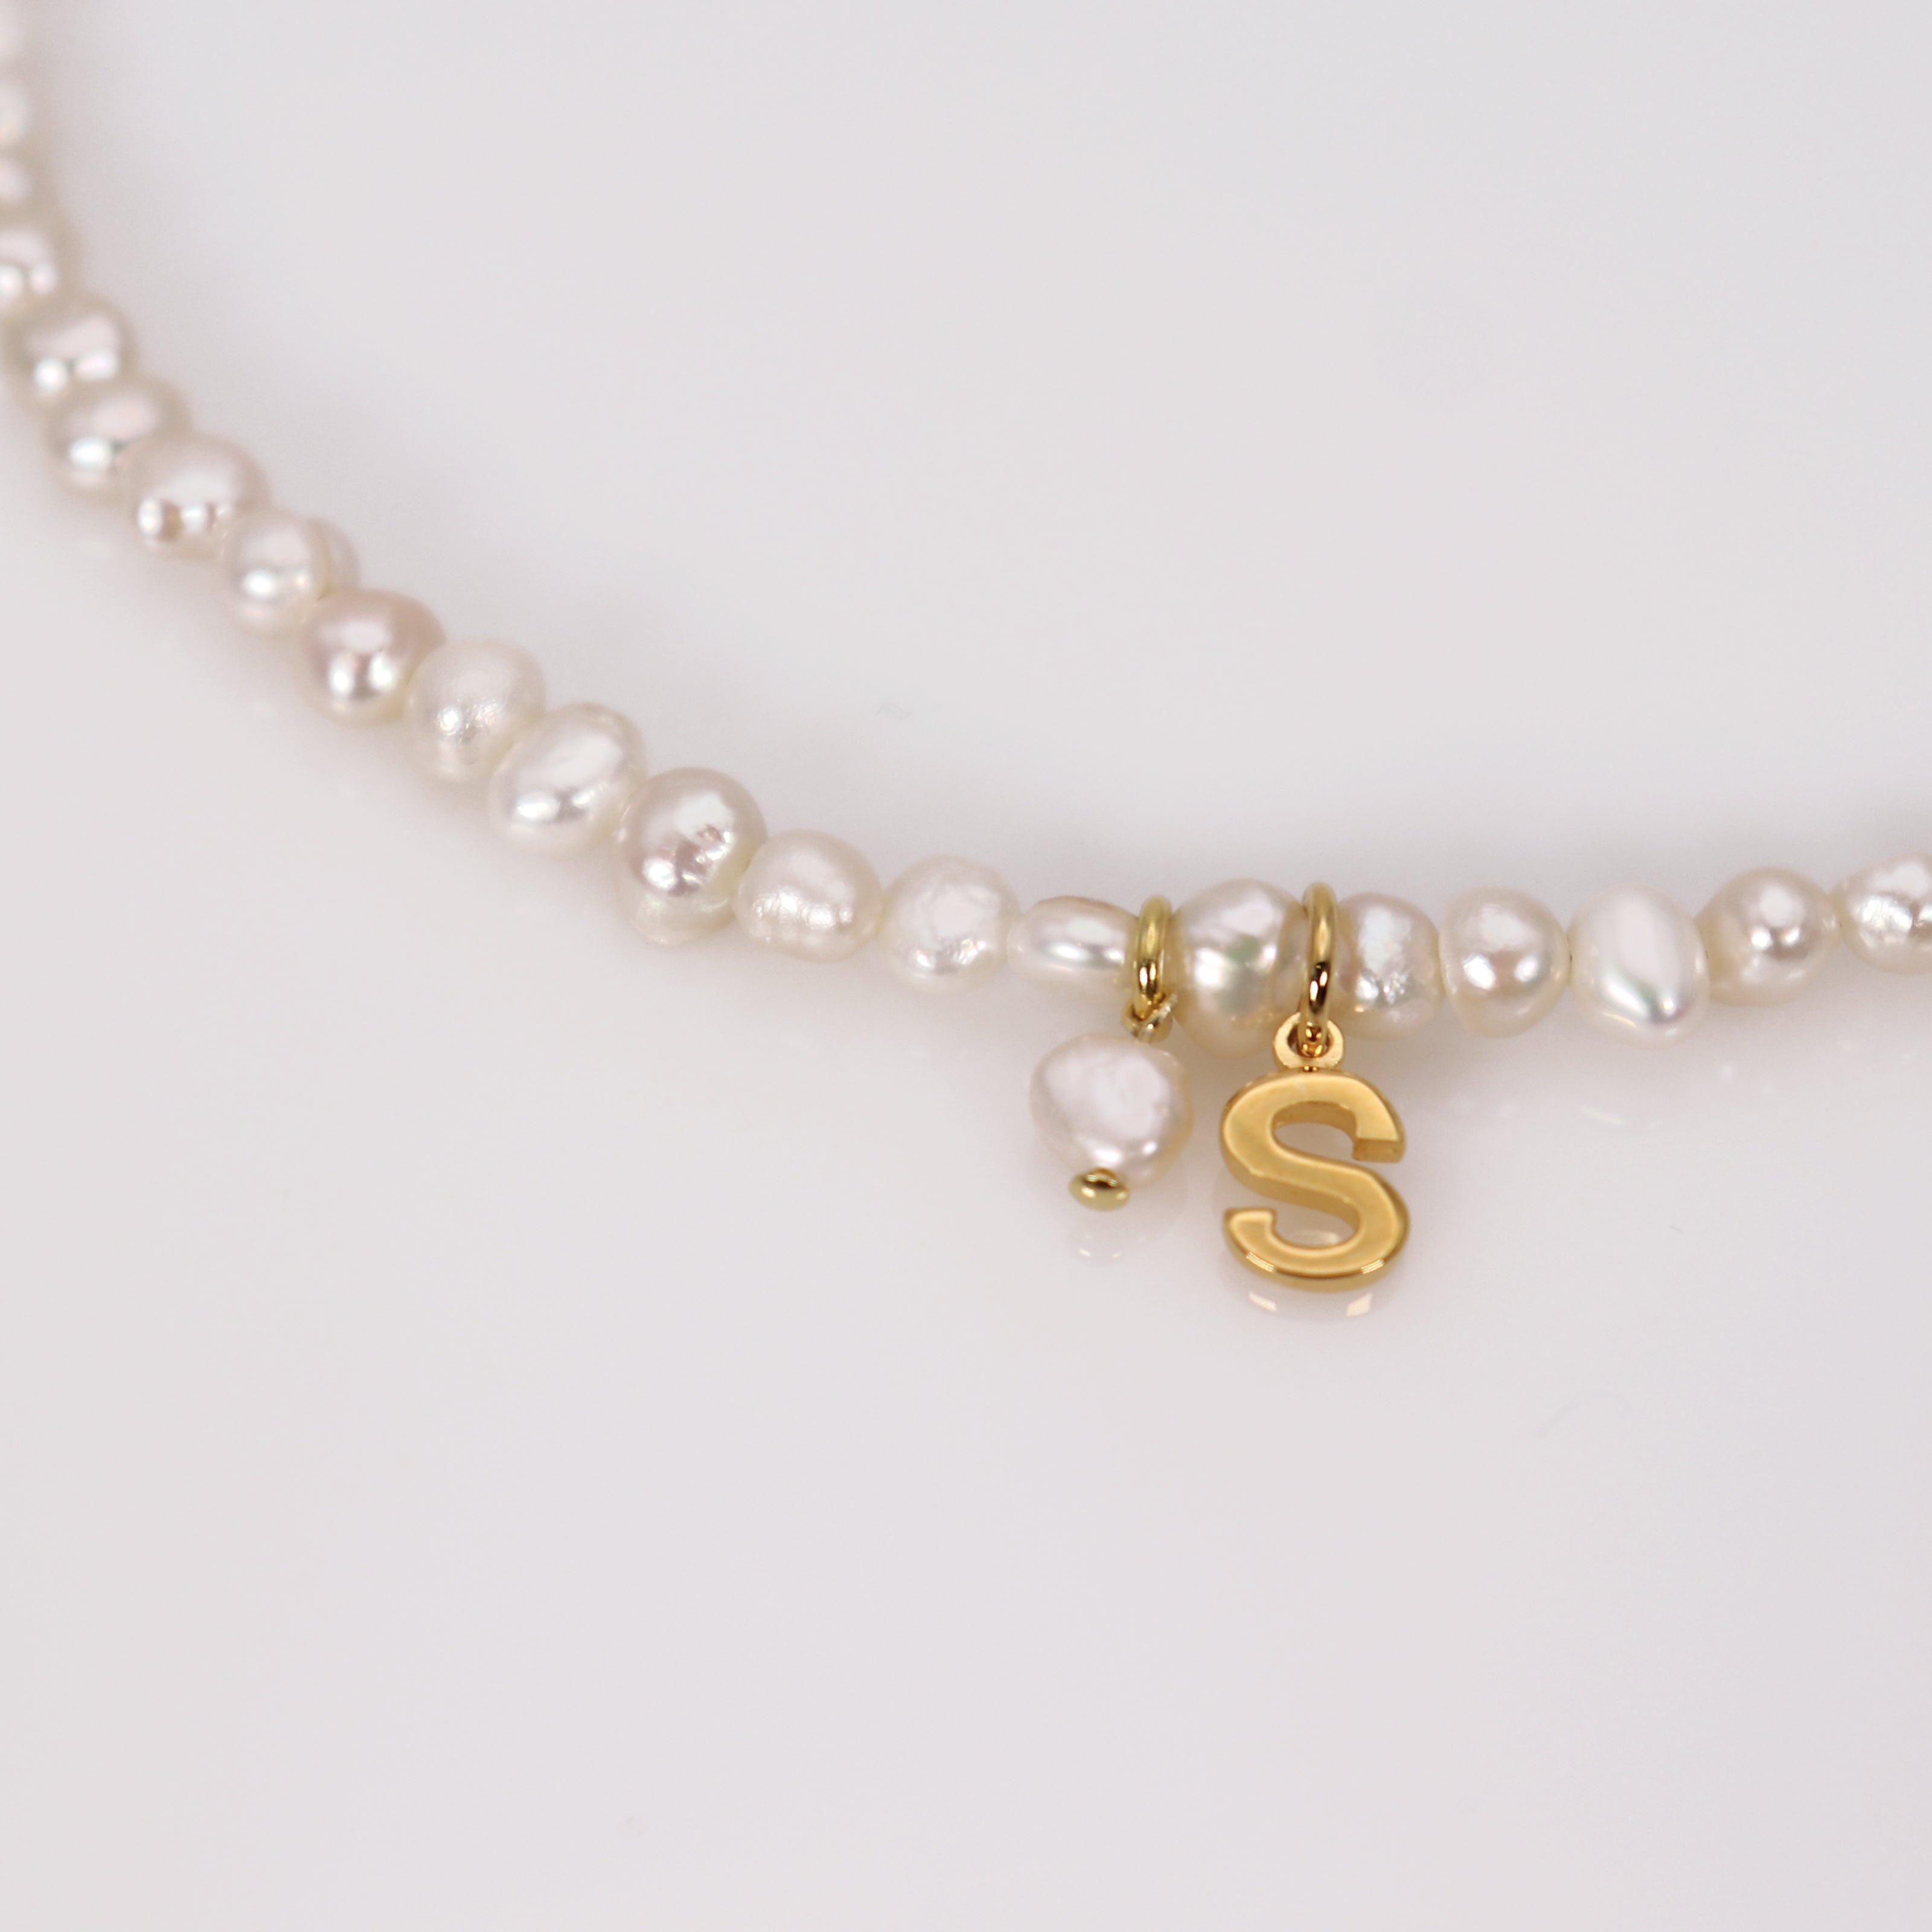 Pearl Initial Necklace Silver BlackSugar-Fine Modern Chic Jewelry that Celebrities Wear